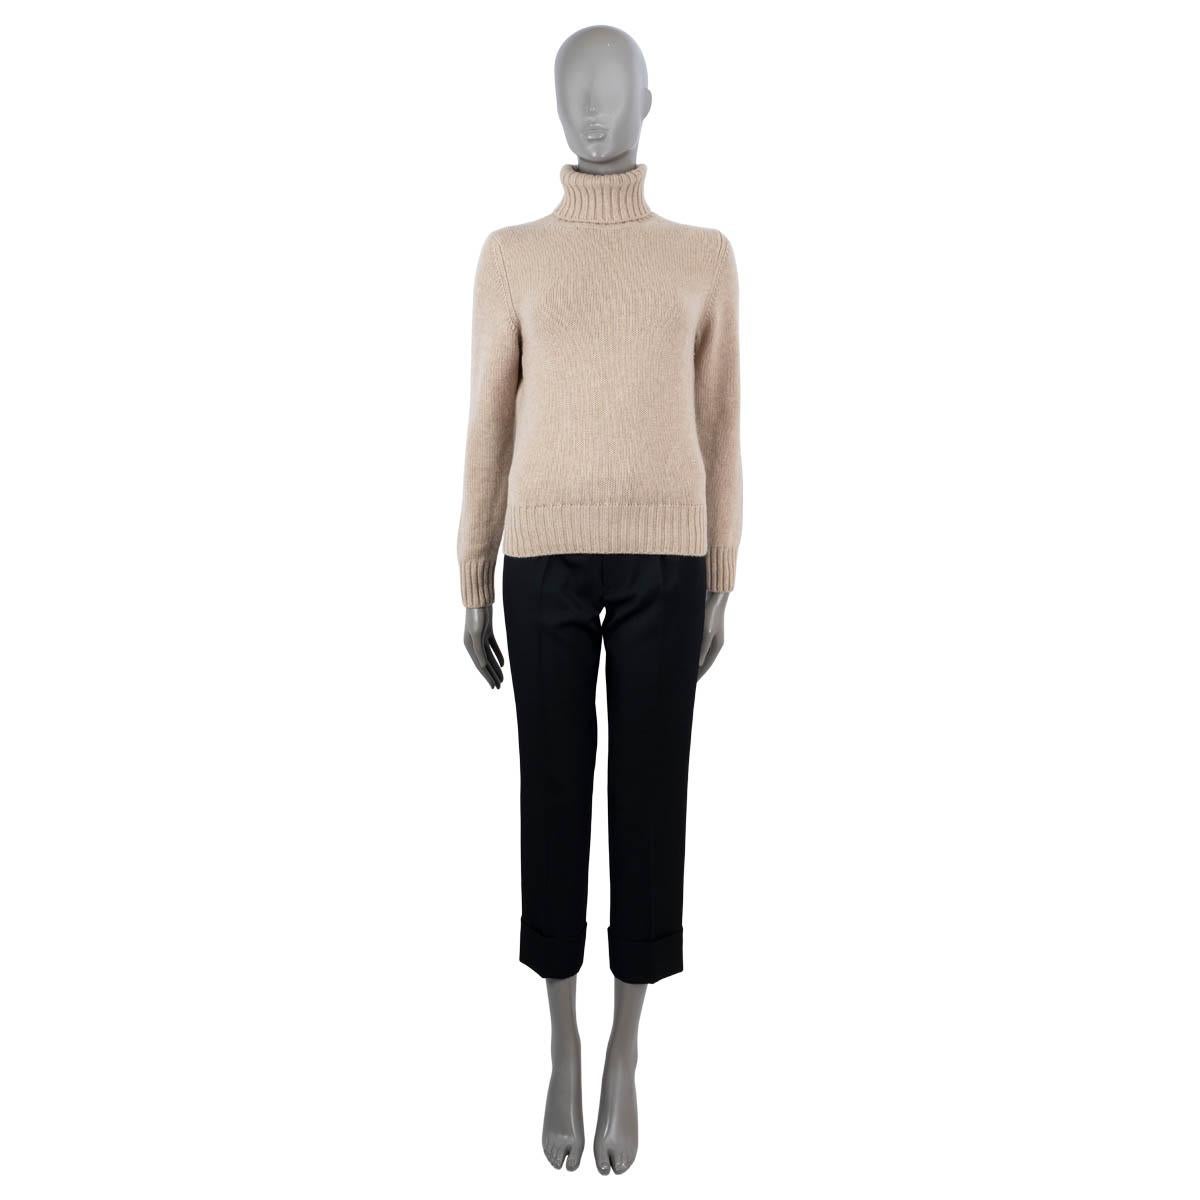 100% authentic Loro Piana Parksville turtleneck knit sweater in light beige cashmere (100%). Features long sleeves, a ribbed hemline and ribbed cuffs. Unlined. Has been worn and is in excellent condition.

Measurements
Tag Size	42
Size	M
Shoulder